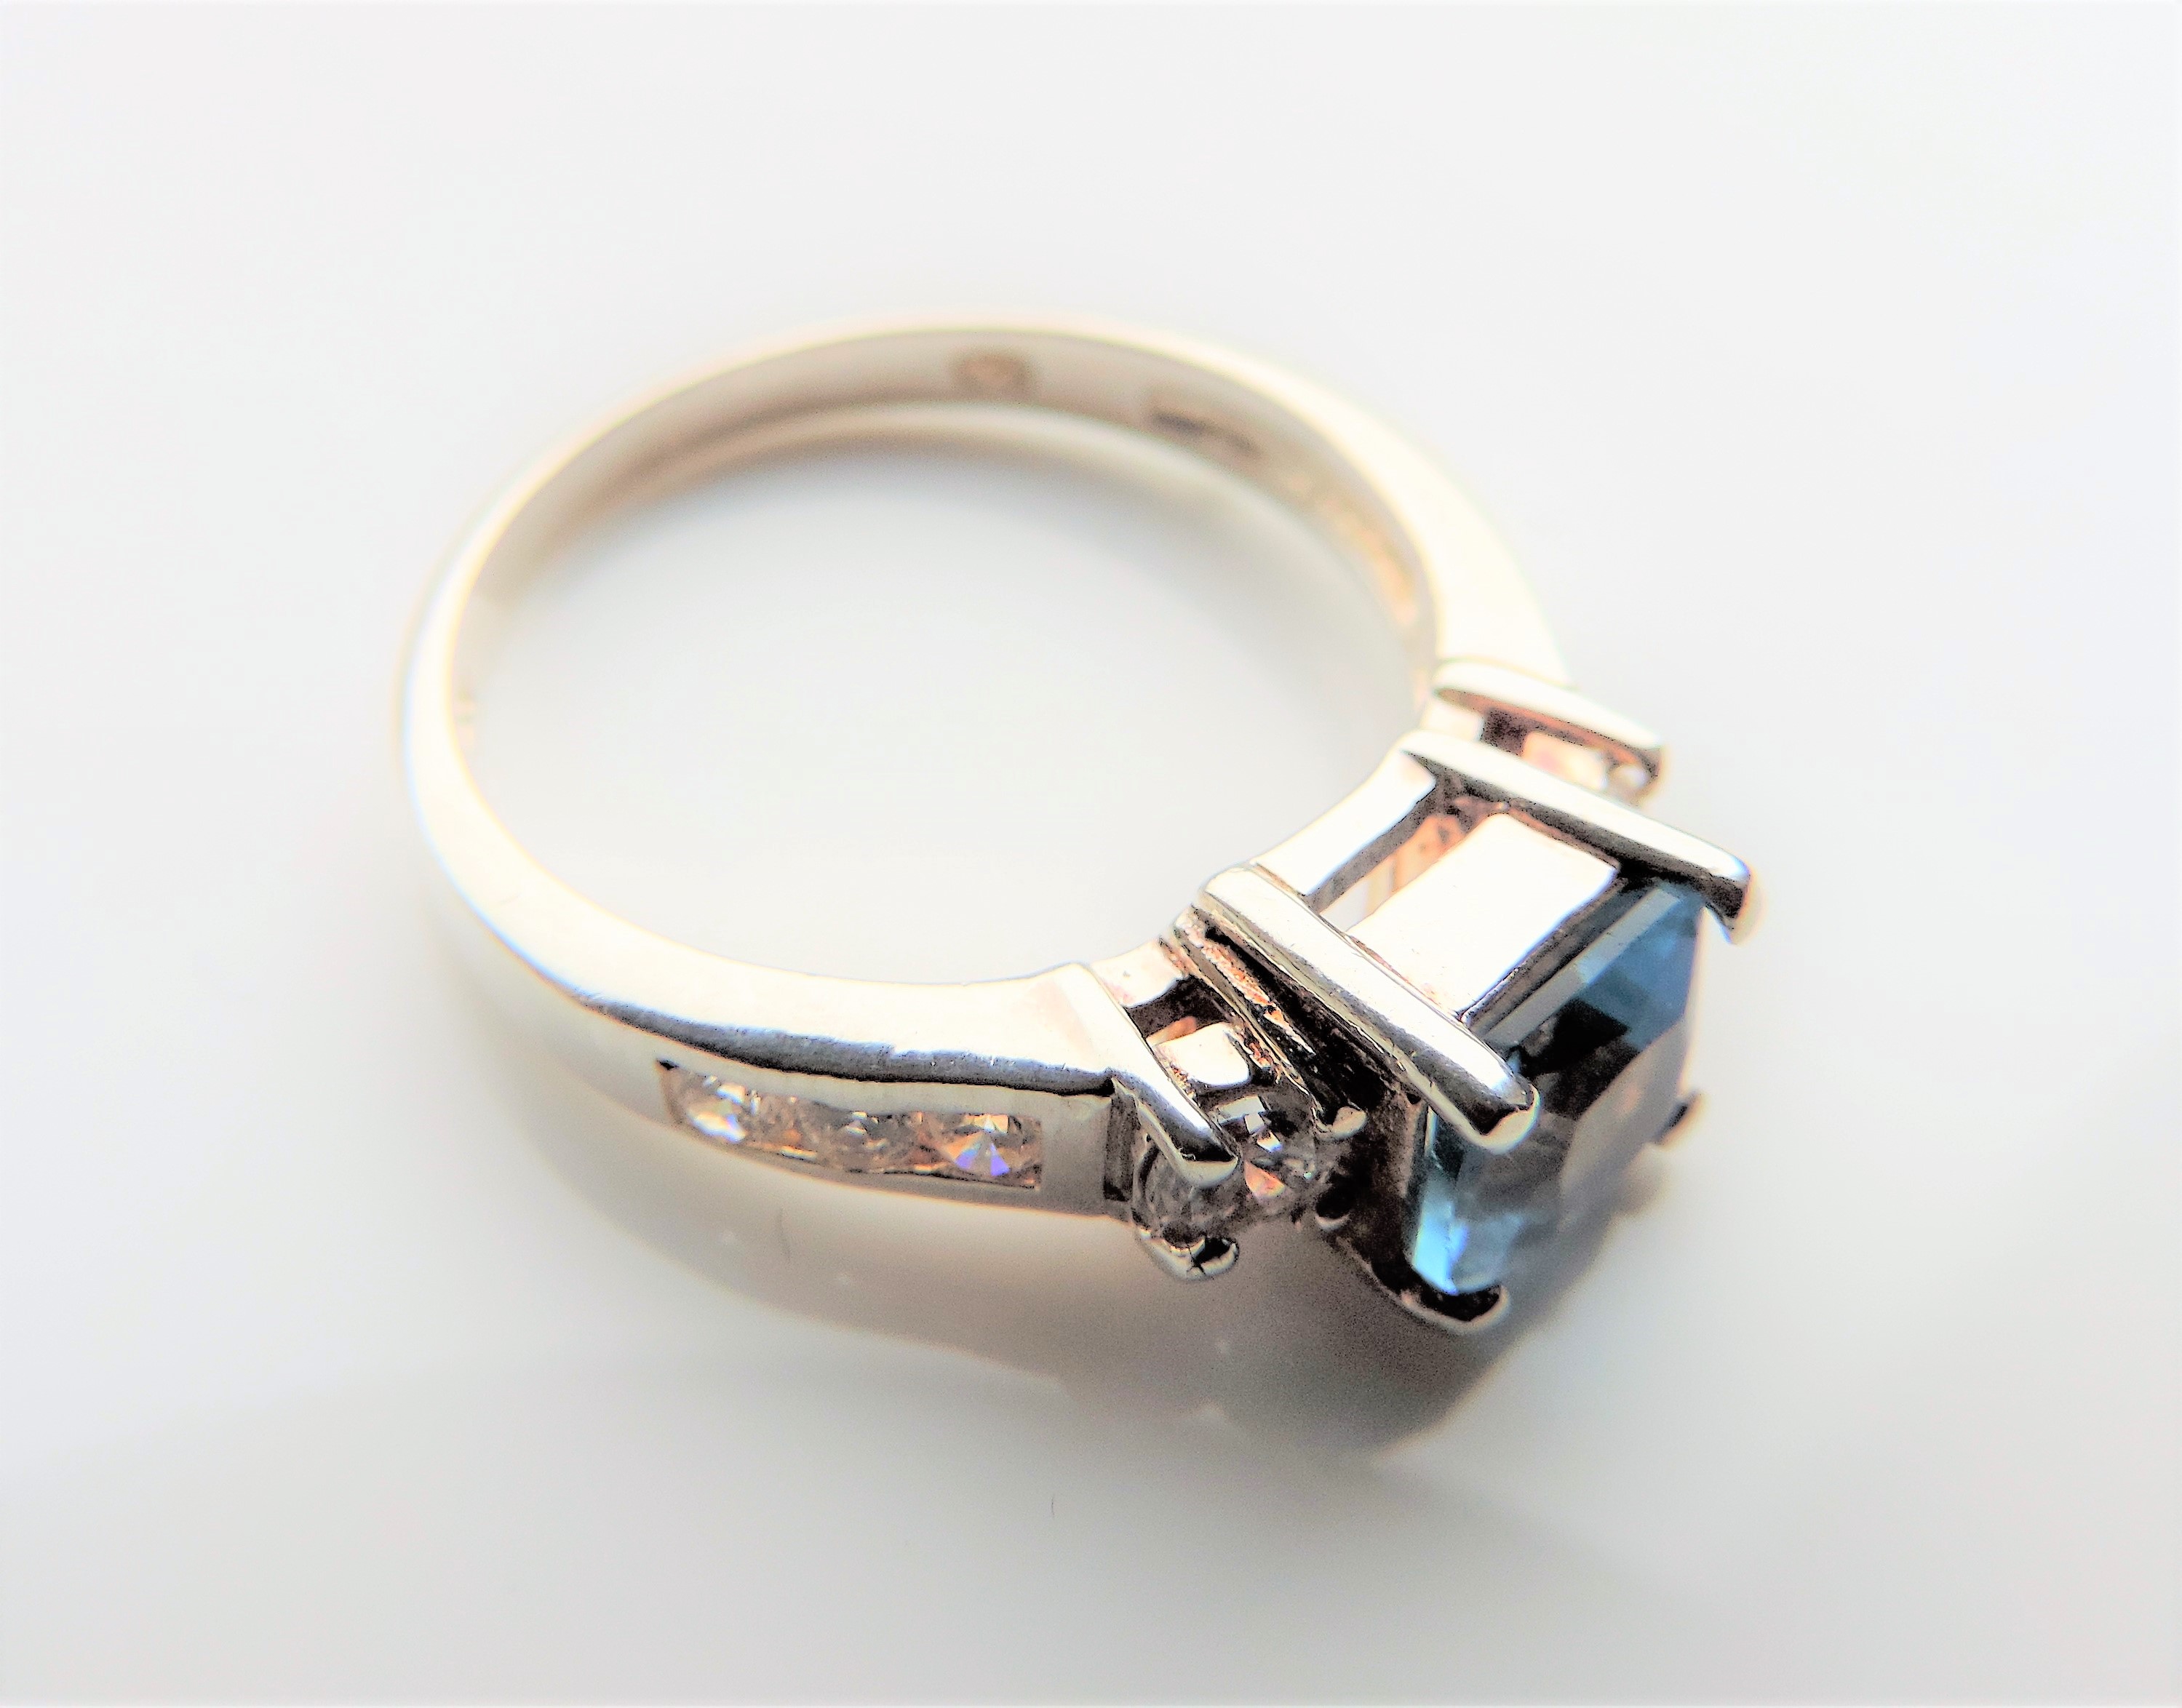 1.76 carat Topaz Ring in Sterling Silver - Image 4 of 4